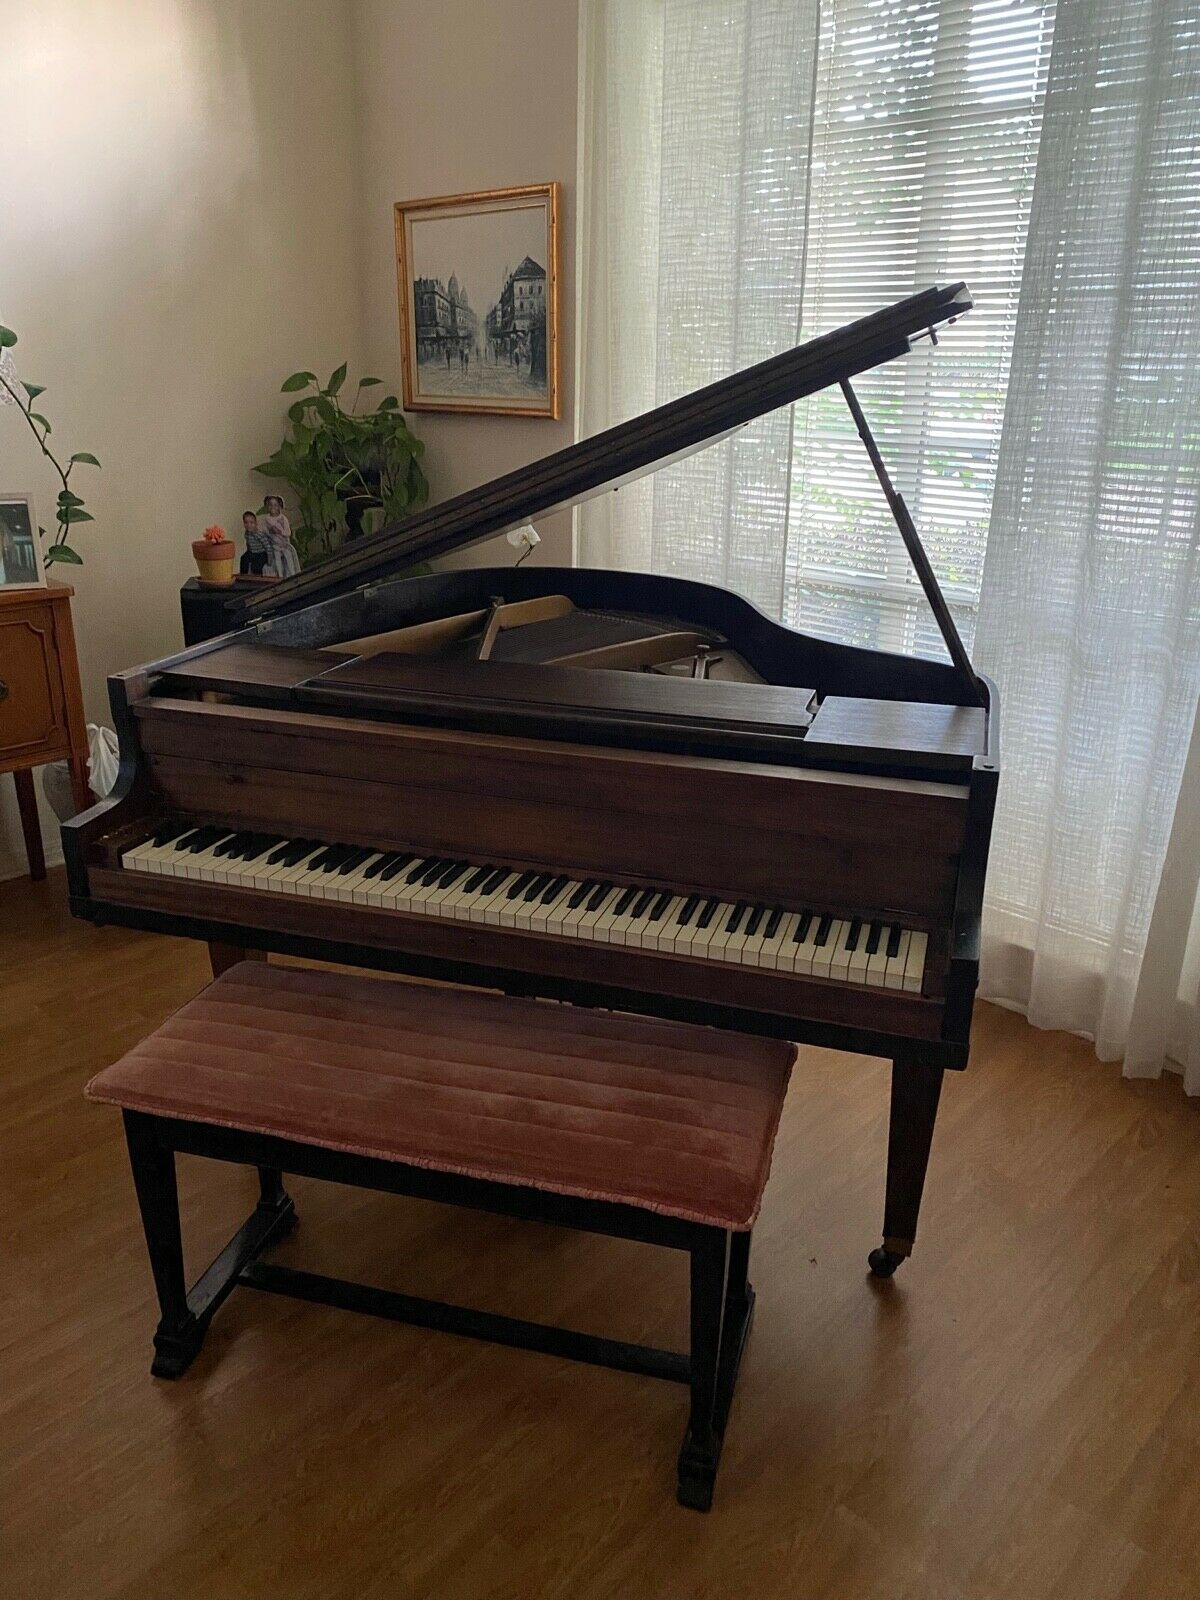 Antique Baby Grand Piano From The 1920’s, Walnut Finish, Excellent Condition